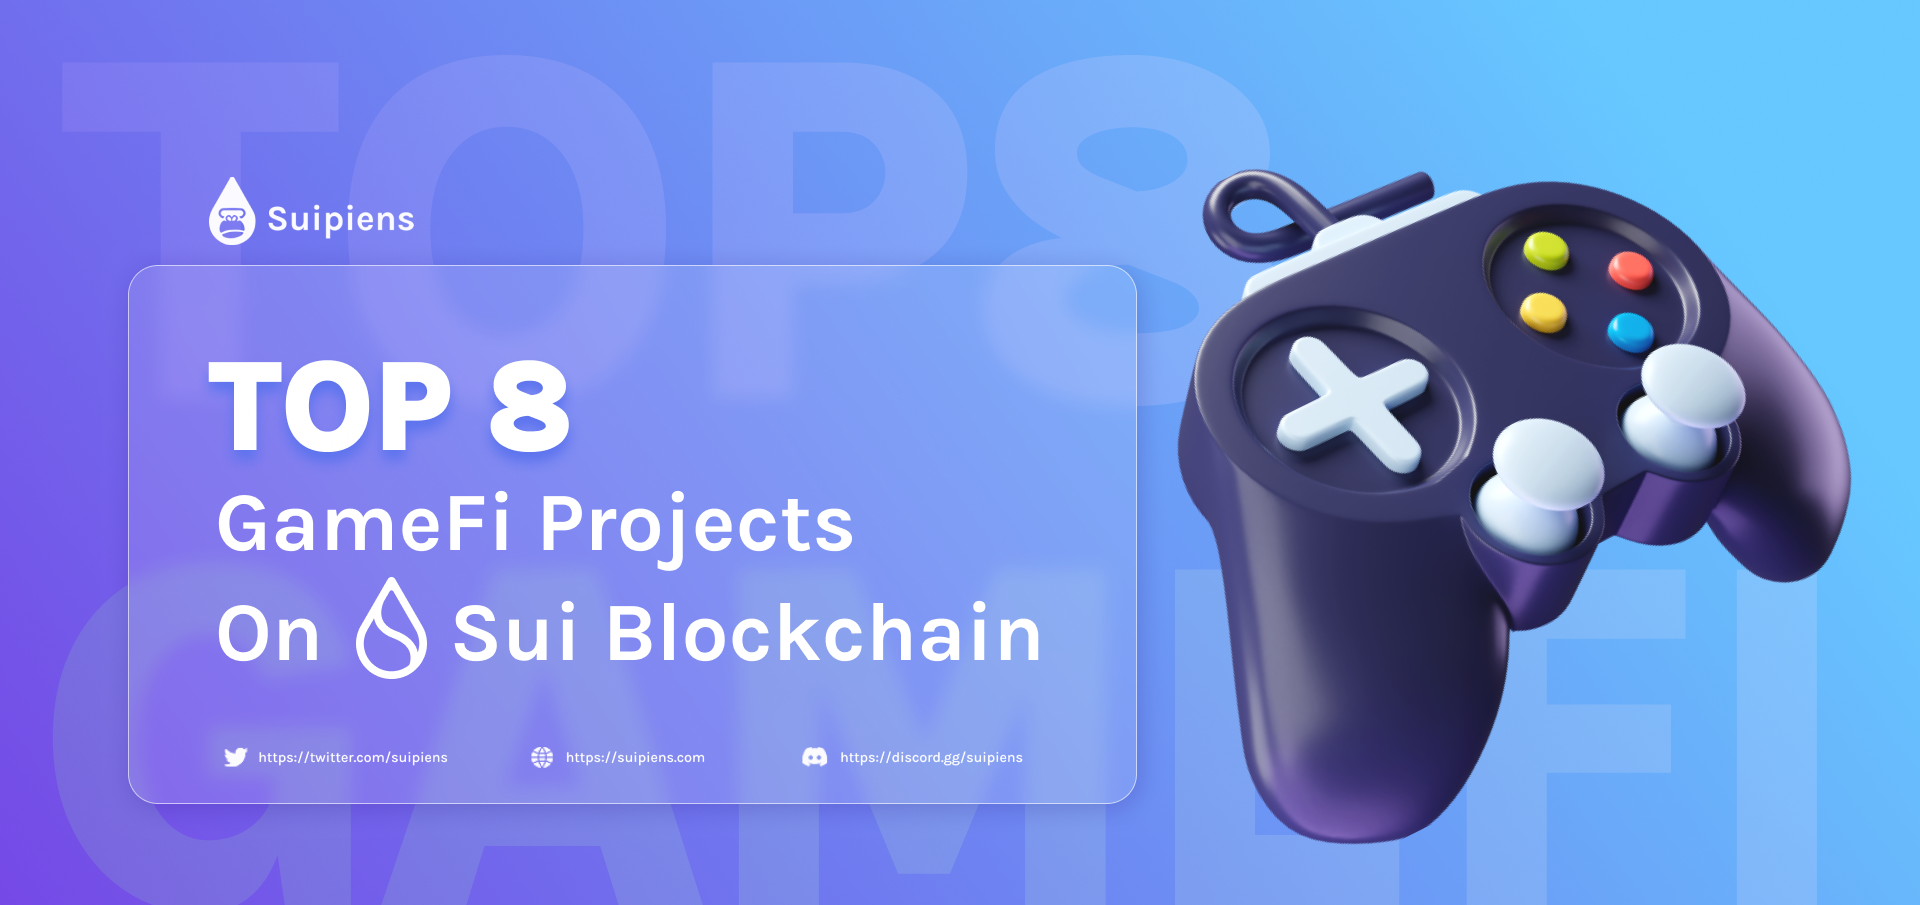 Top 8 GameFi projects on Sui Blockchain